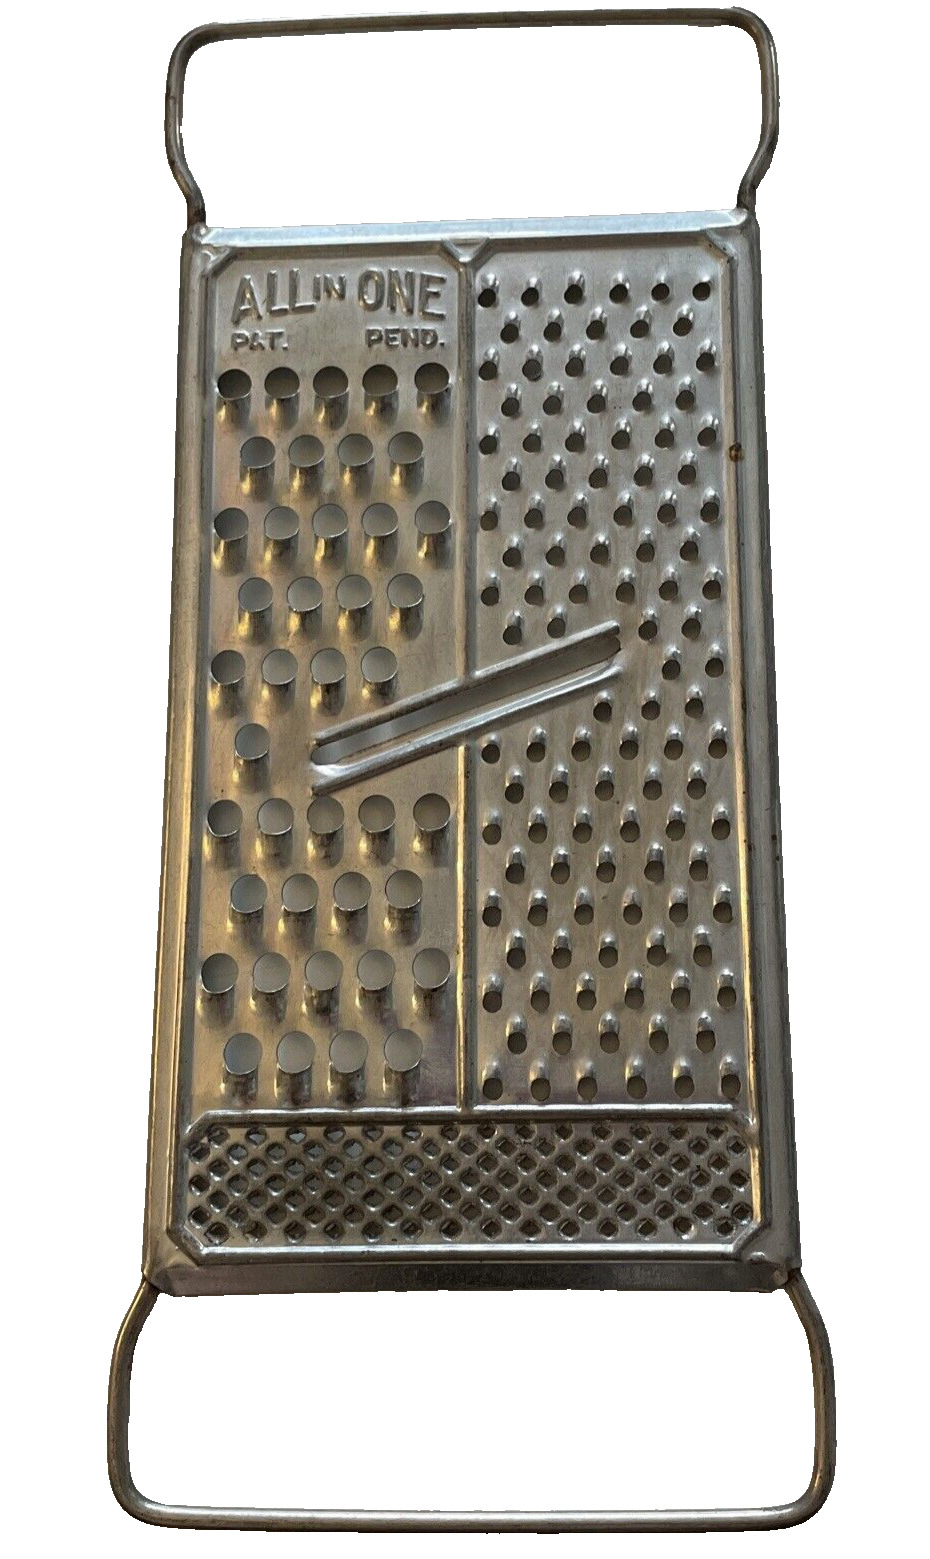 Vintage All In One Pat Pending Cheese Grater Farmhouse Cabin Decor Wall Hanging